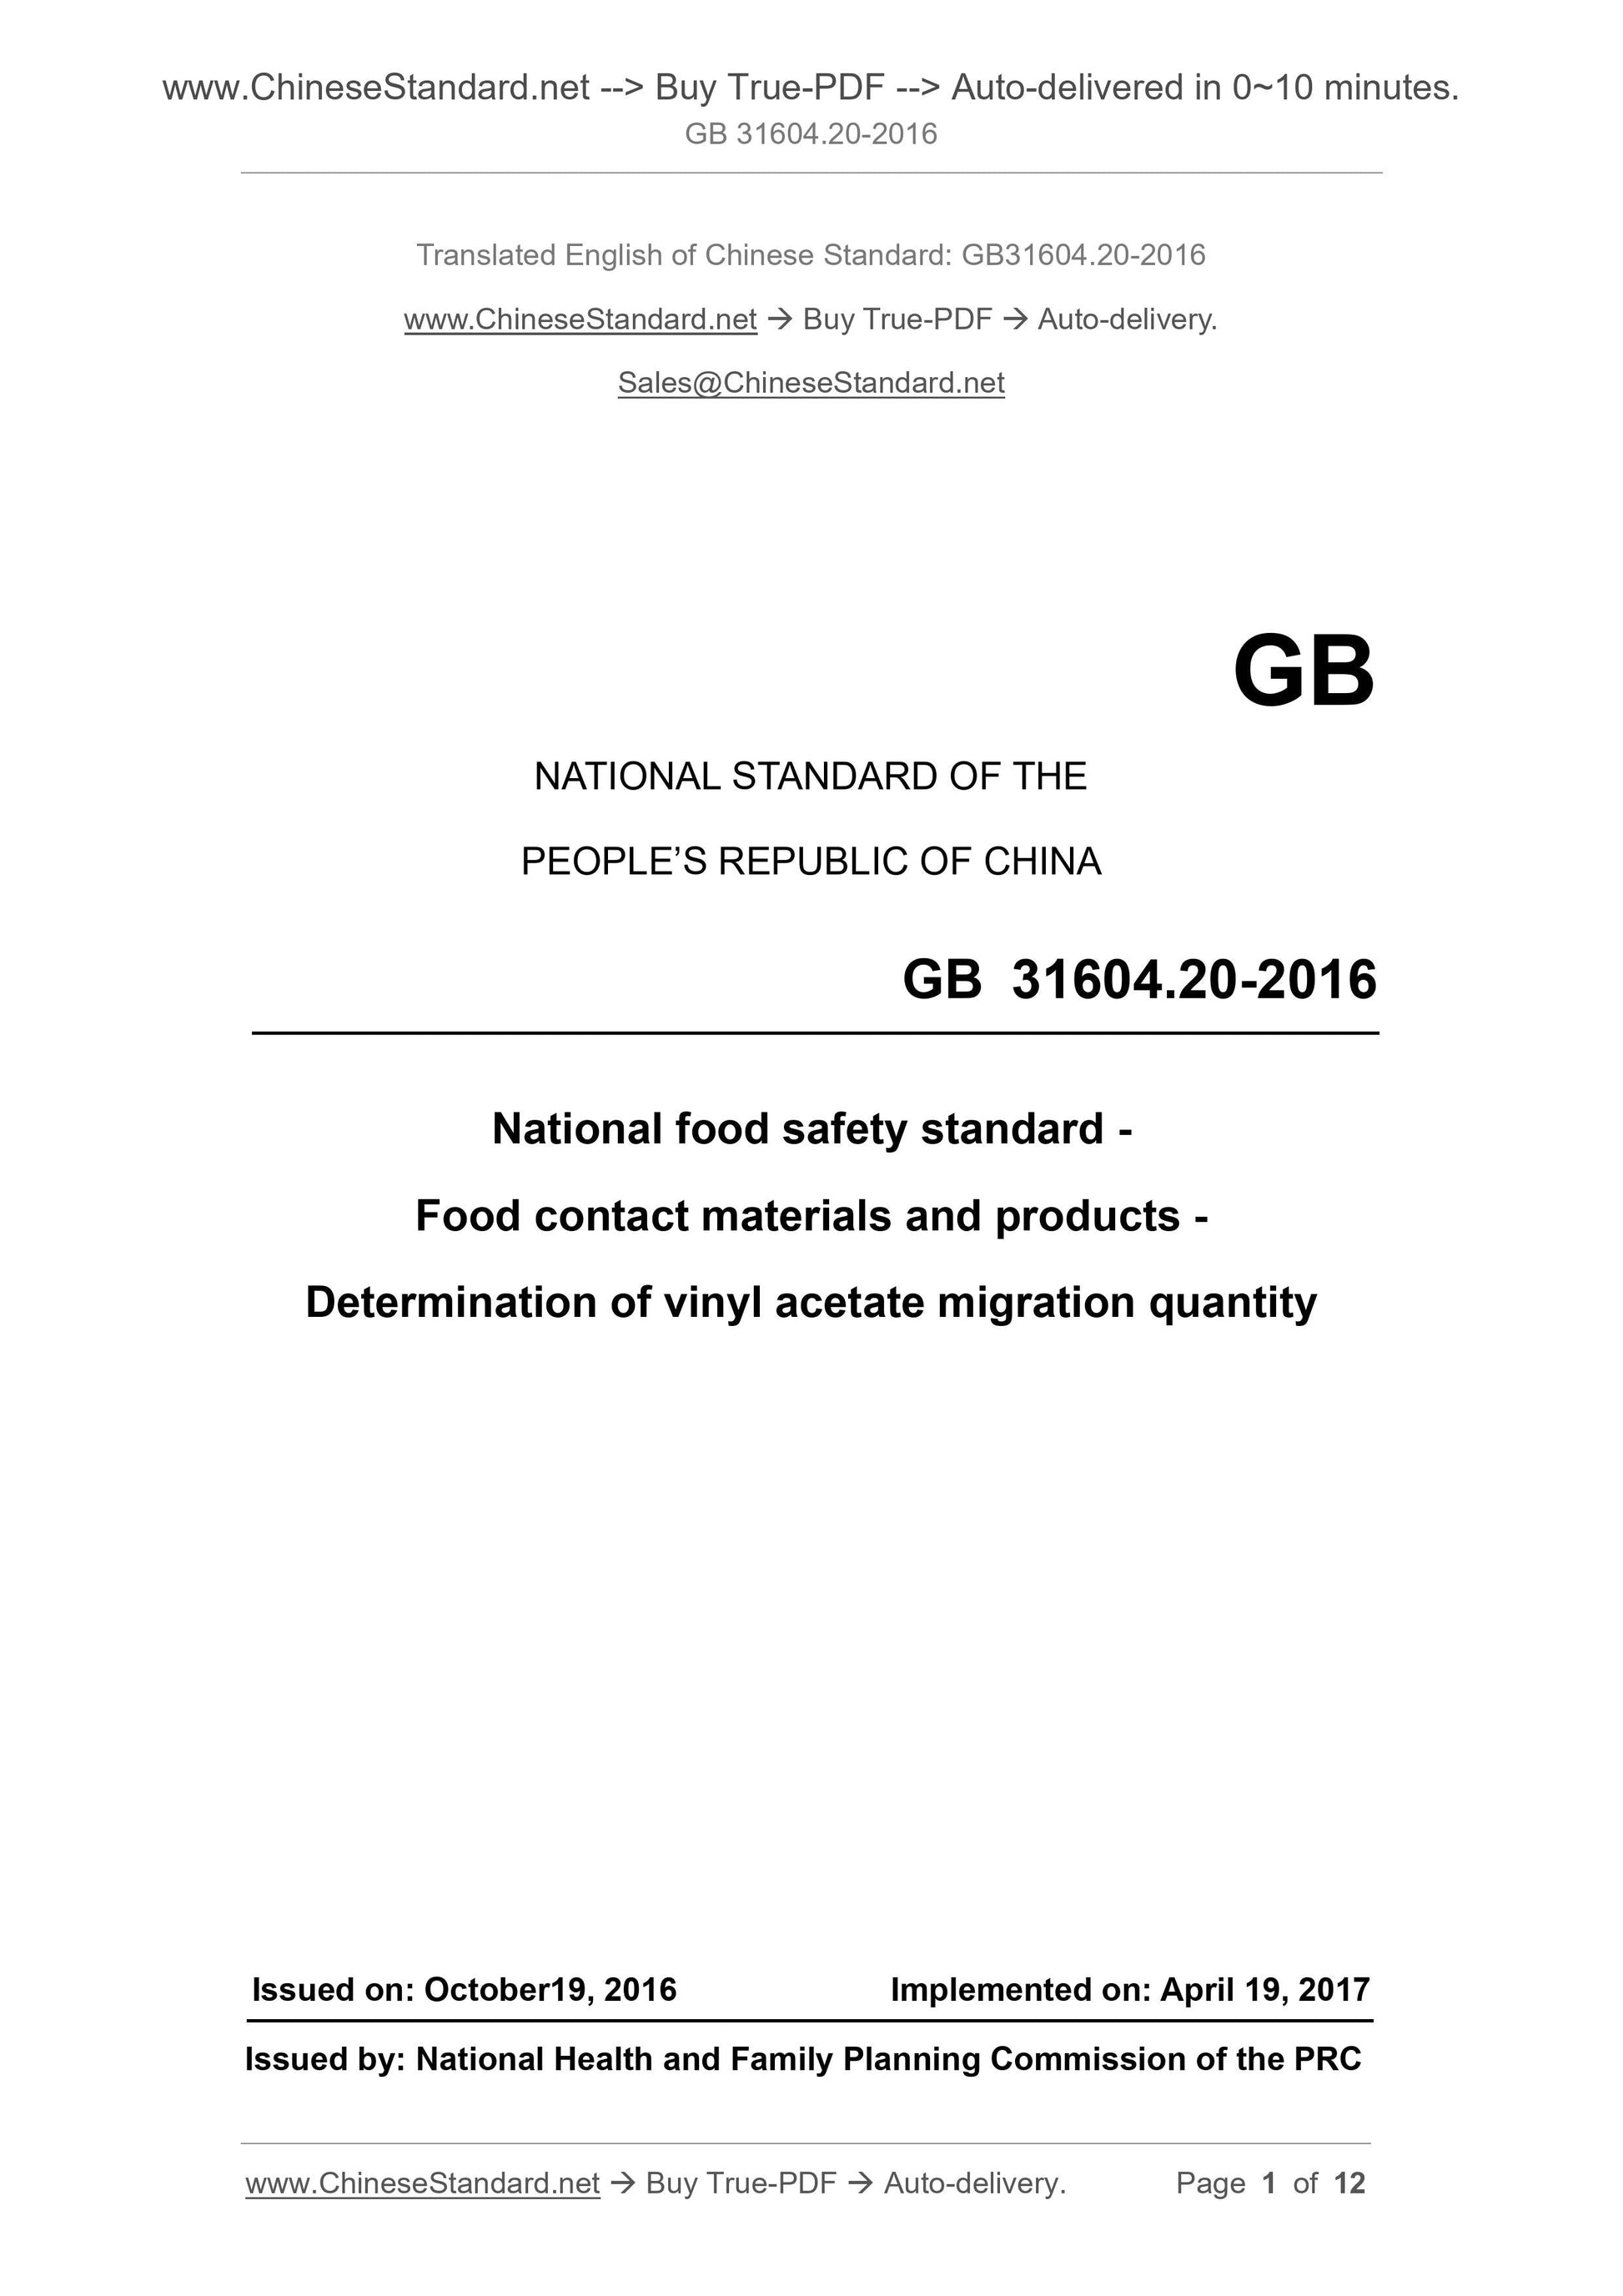 GB 31604.20-2016 Page 1